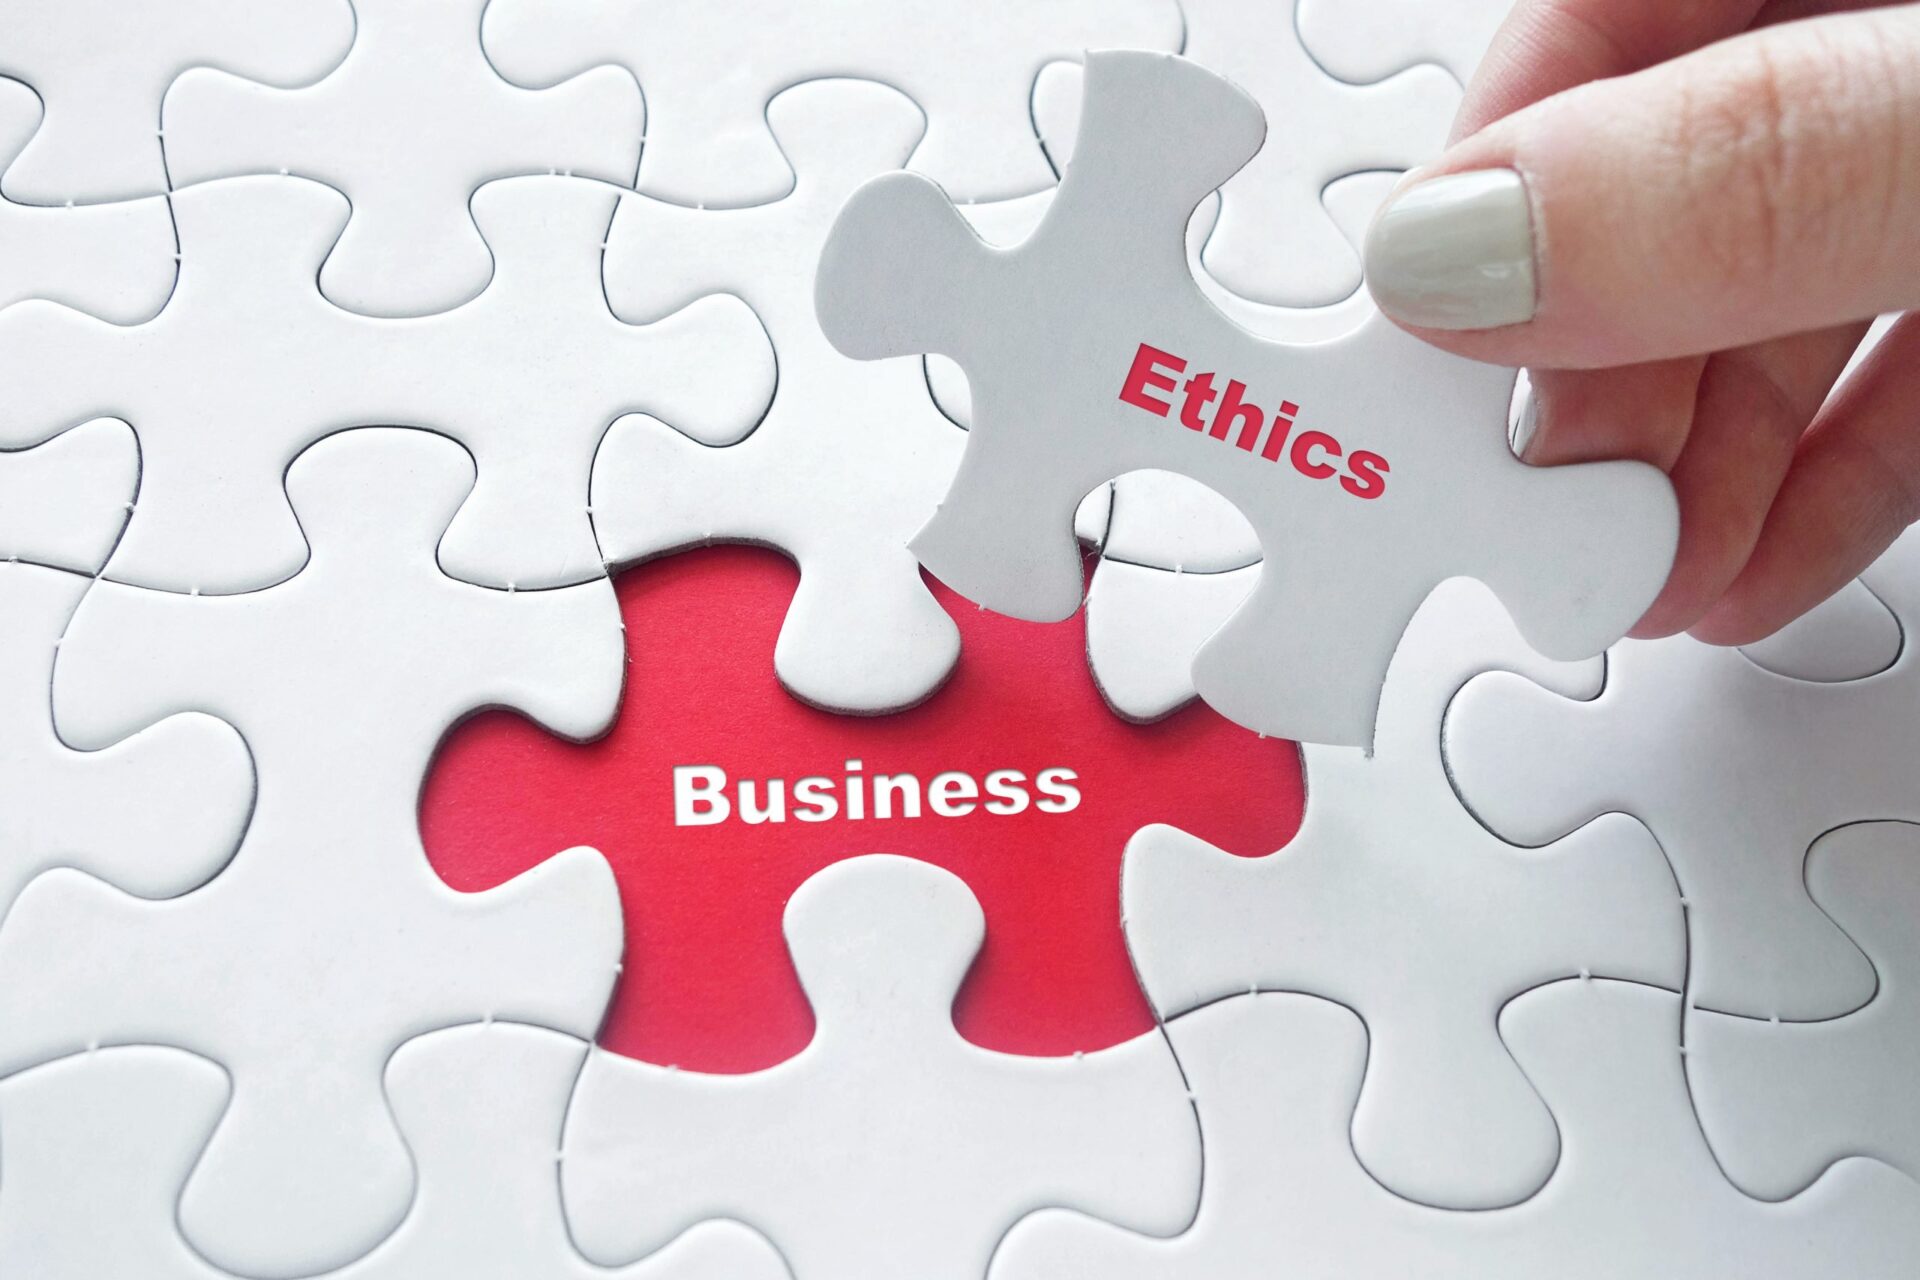 Photo of a puzzle piece saying 'ethics' replacing a piece saying 'Business'